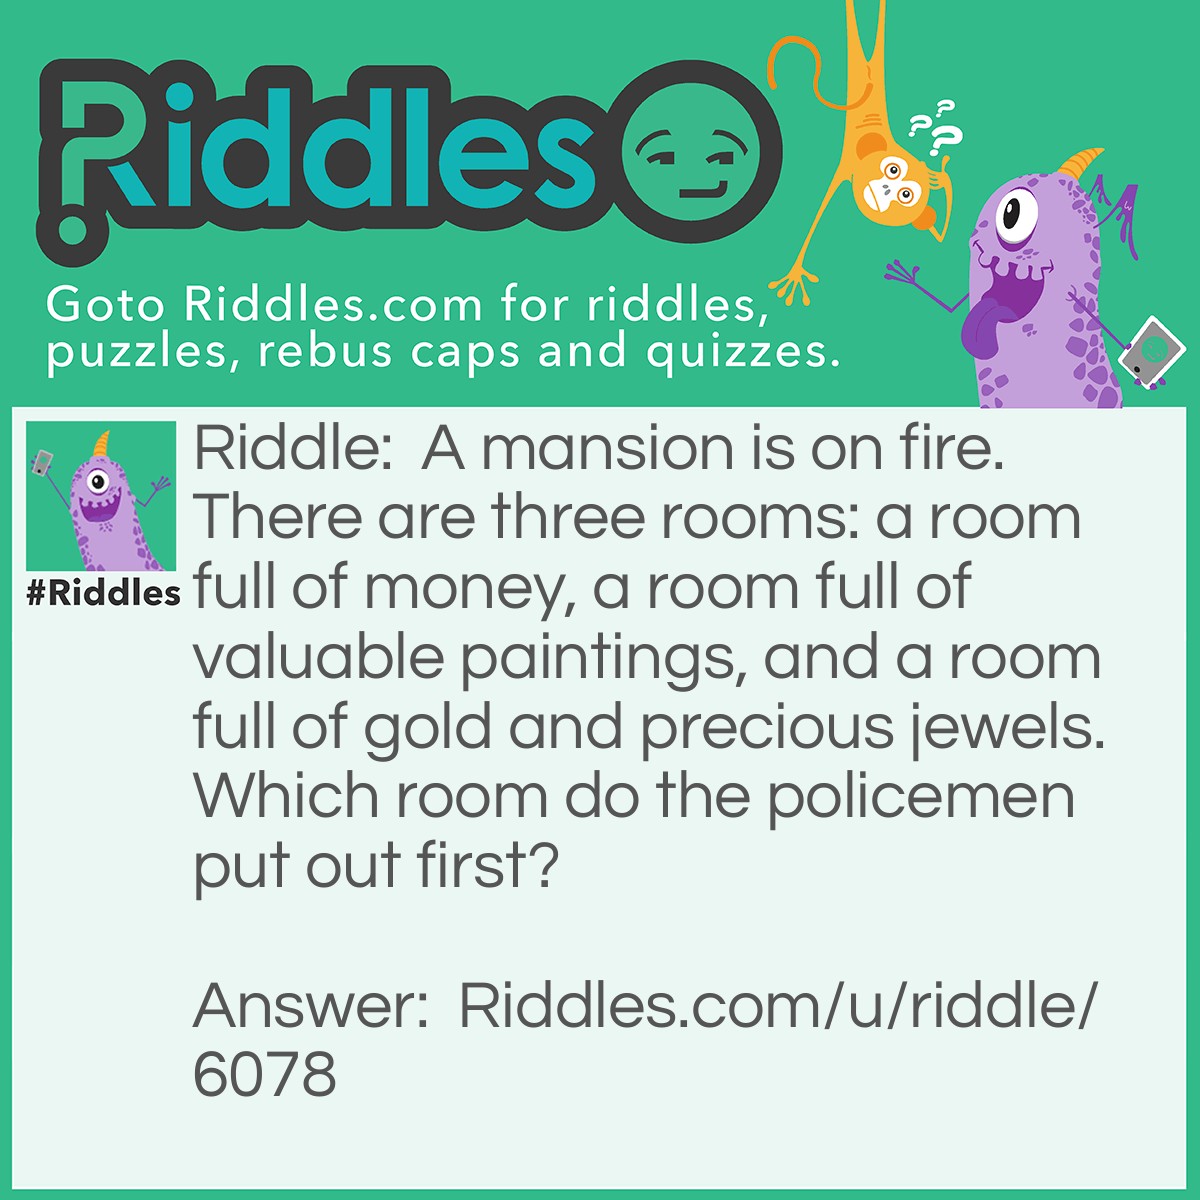 Riddle: A mansion is on fire. There are three rooms: a room full of money, a room full of valuable paintings, and a room full of gold and precious jewels. Which room do the policemen put out first? Answer: None of them. They are the POLICEmen!